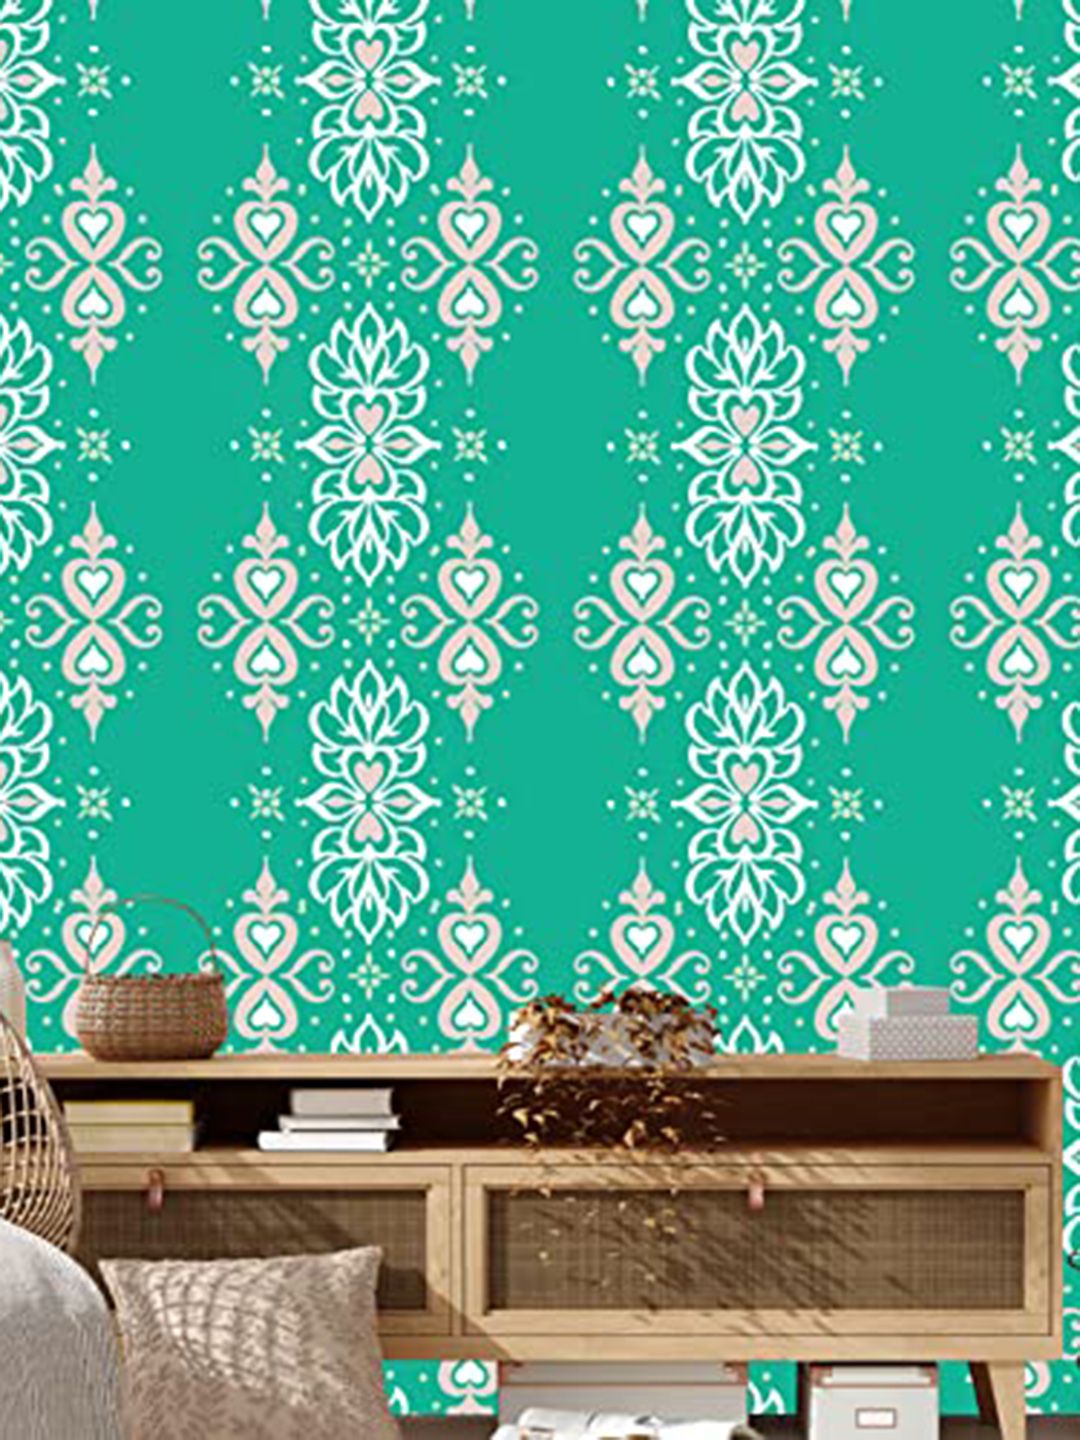 Asian Paints Green & White Self Adhesive Wallpaper Price in India